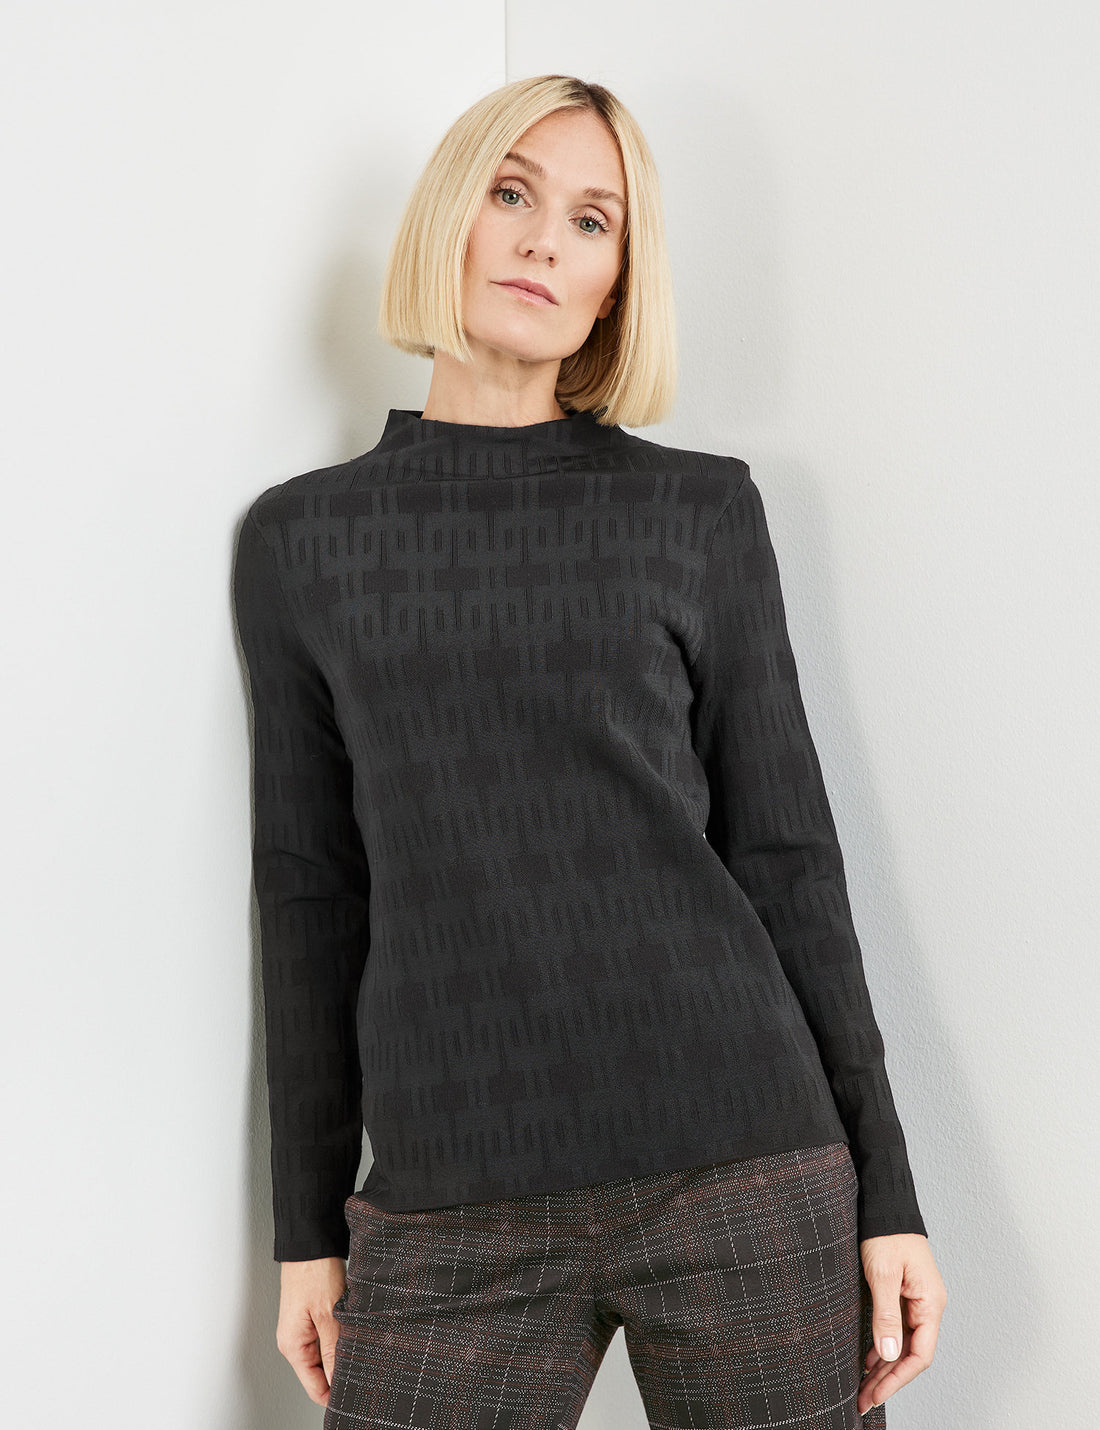 Jumper With A Short Stand Up Collar And A Jacquard Pattern_271022-35719_11000_01